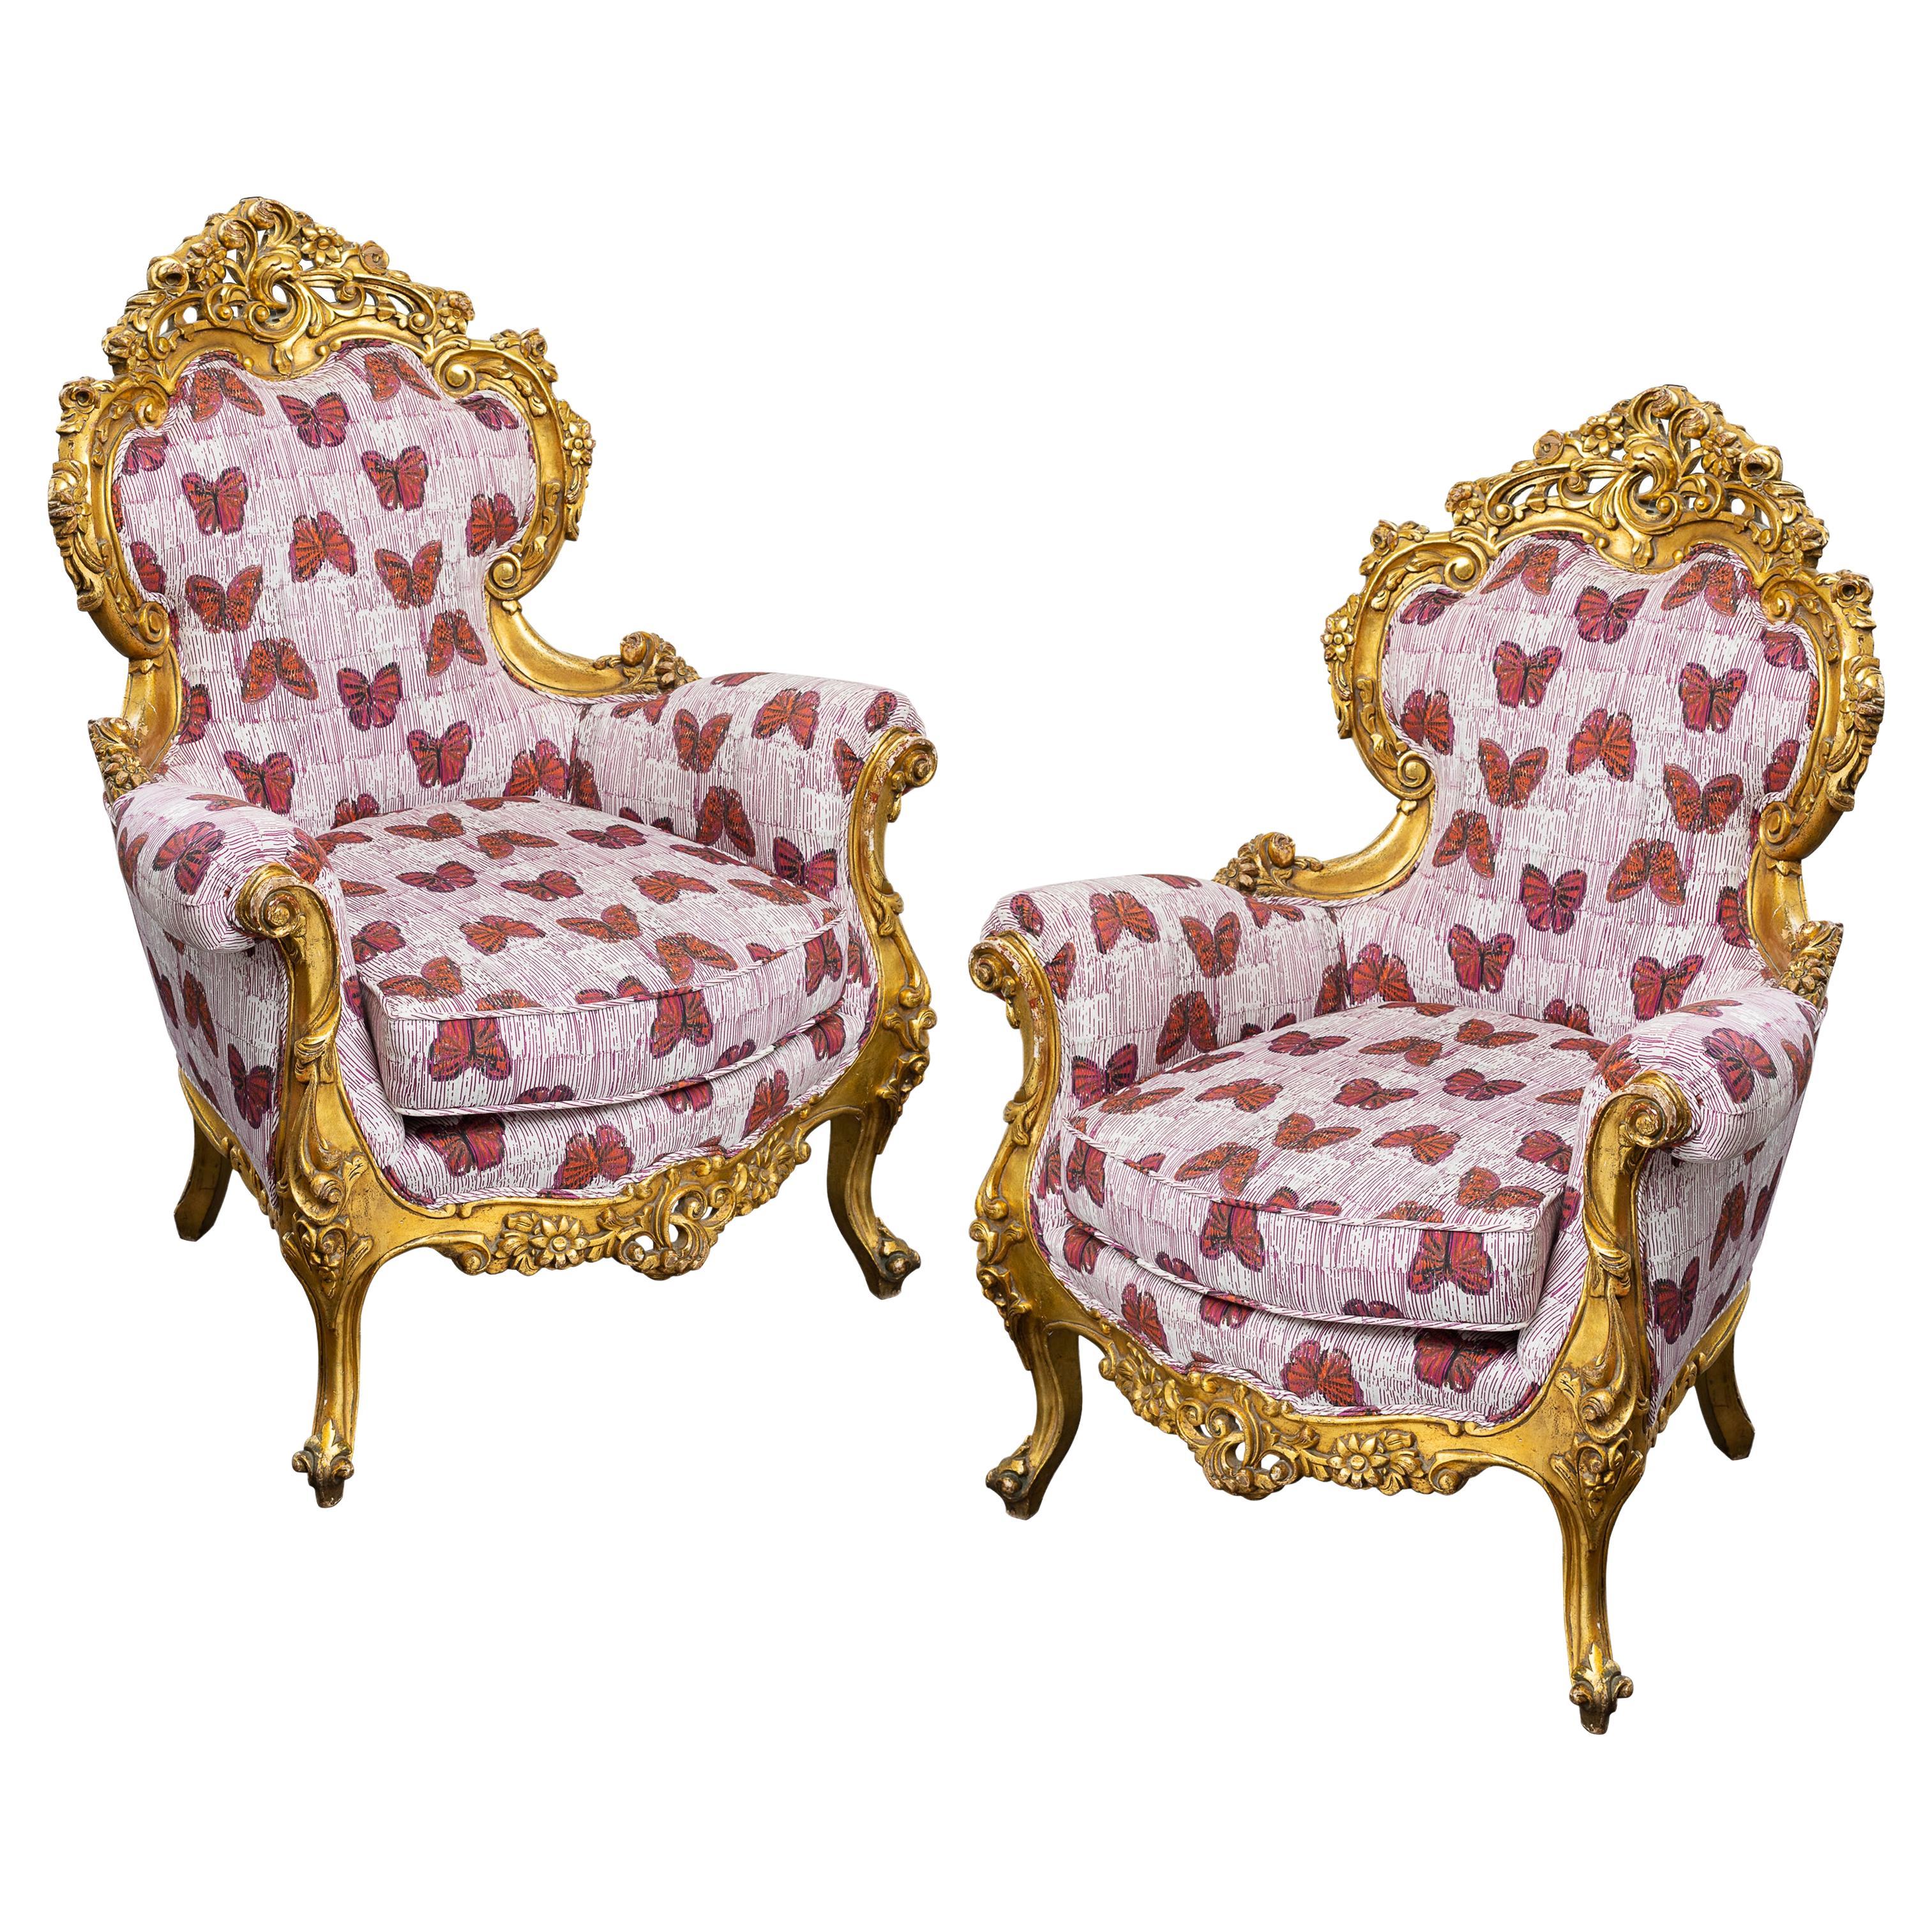 Pair of Antique 19th Century Louis XV Style Gold Leaf Bergere, Hunt Slonem For Sale